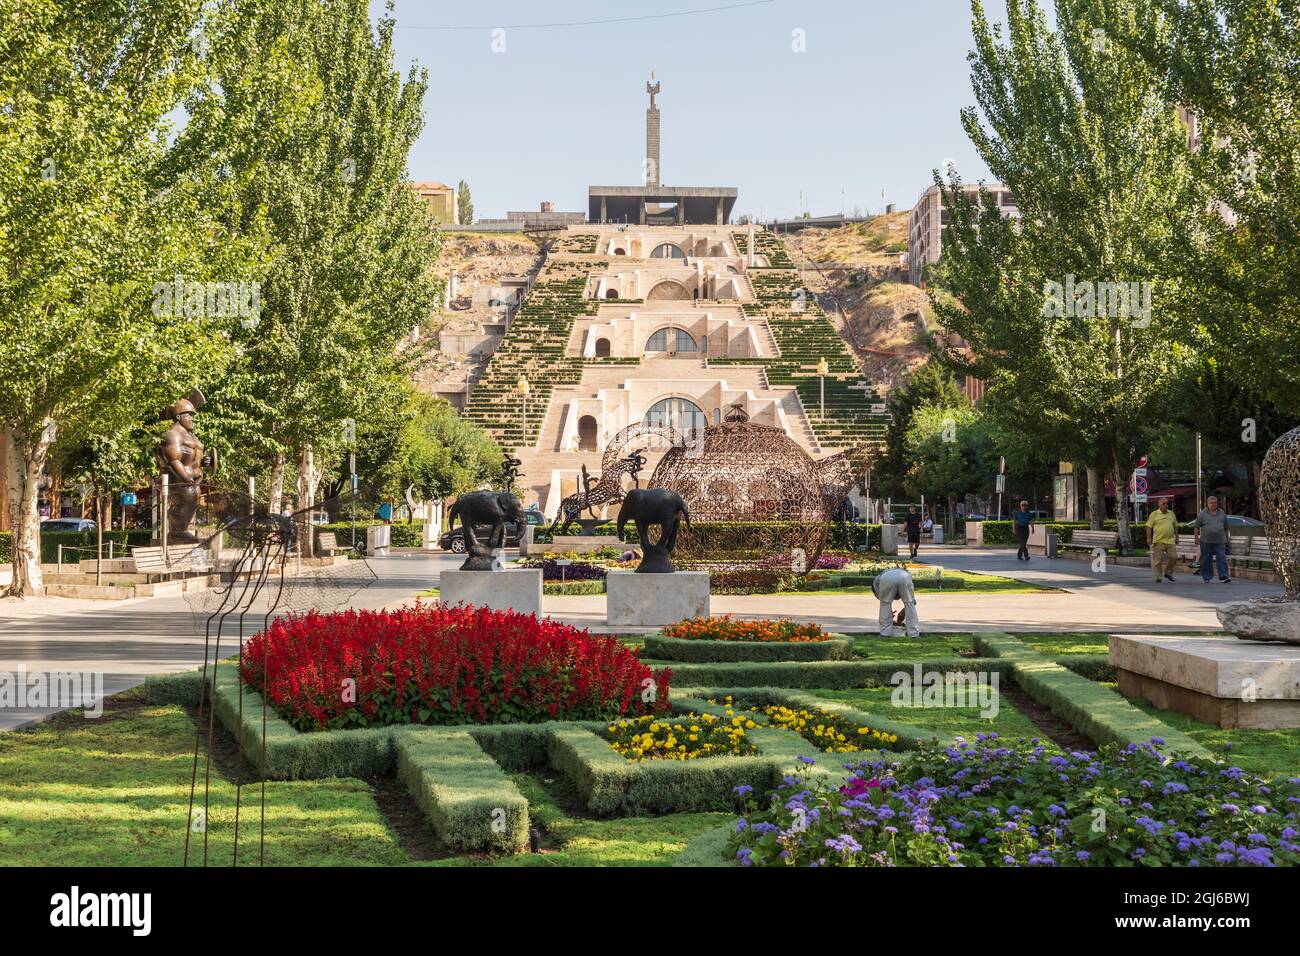 Armenia. Yerevan. Sculpture Garden and the Cascade Complex at the Cafesjian Center for the Arts. (Editorial Use Only) Stock Photo